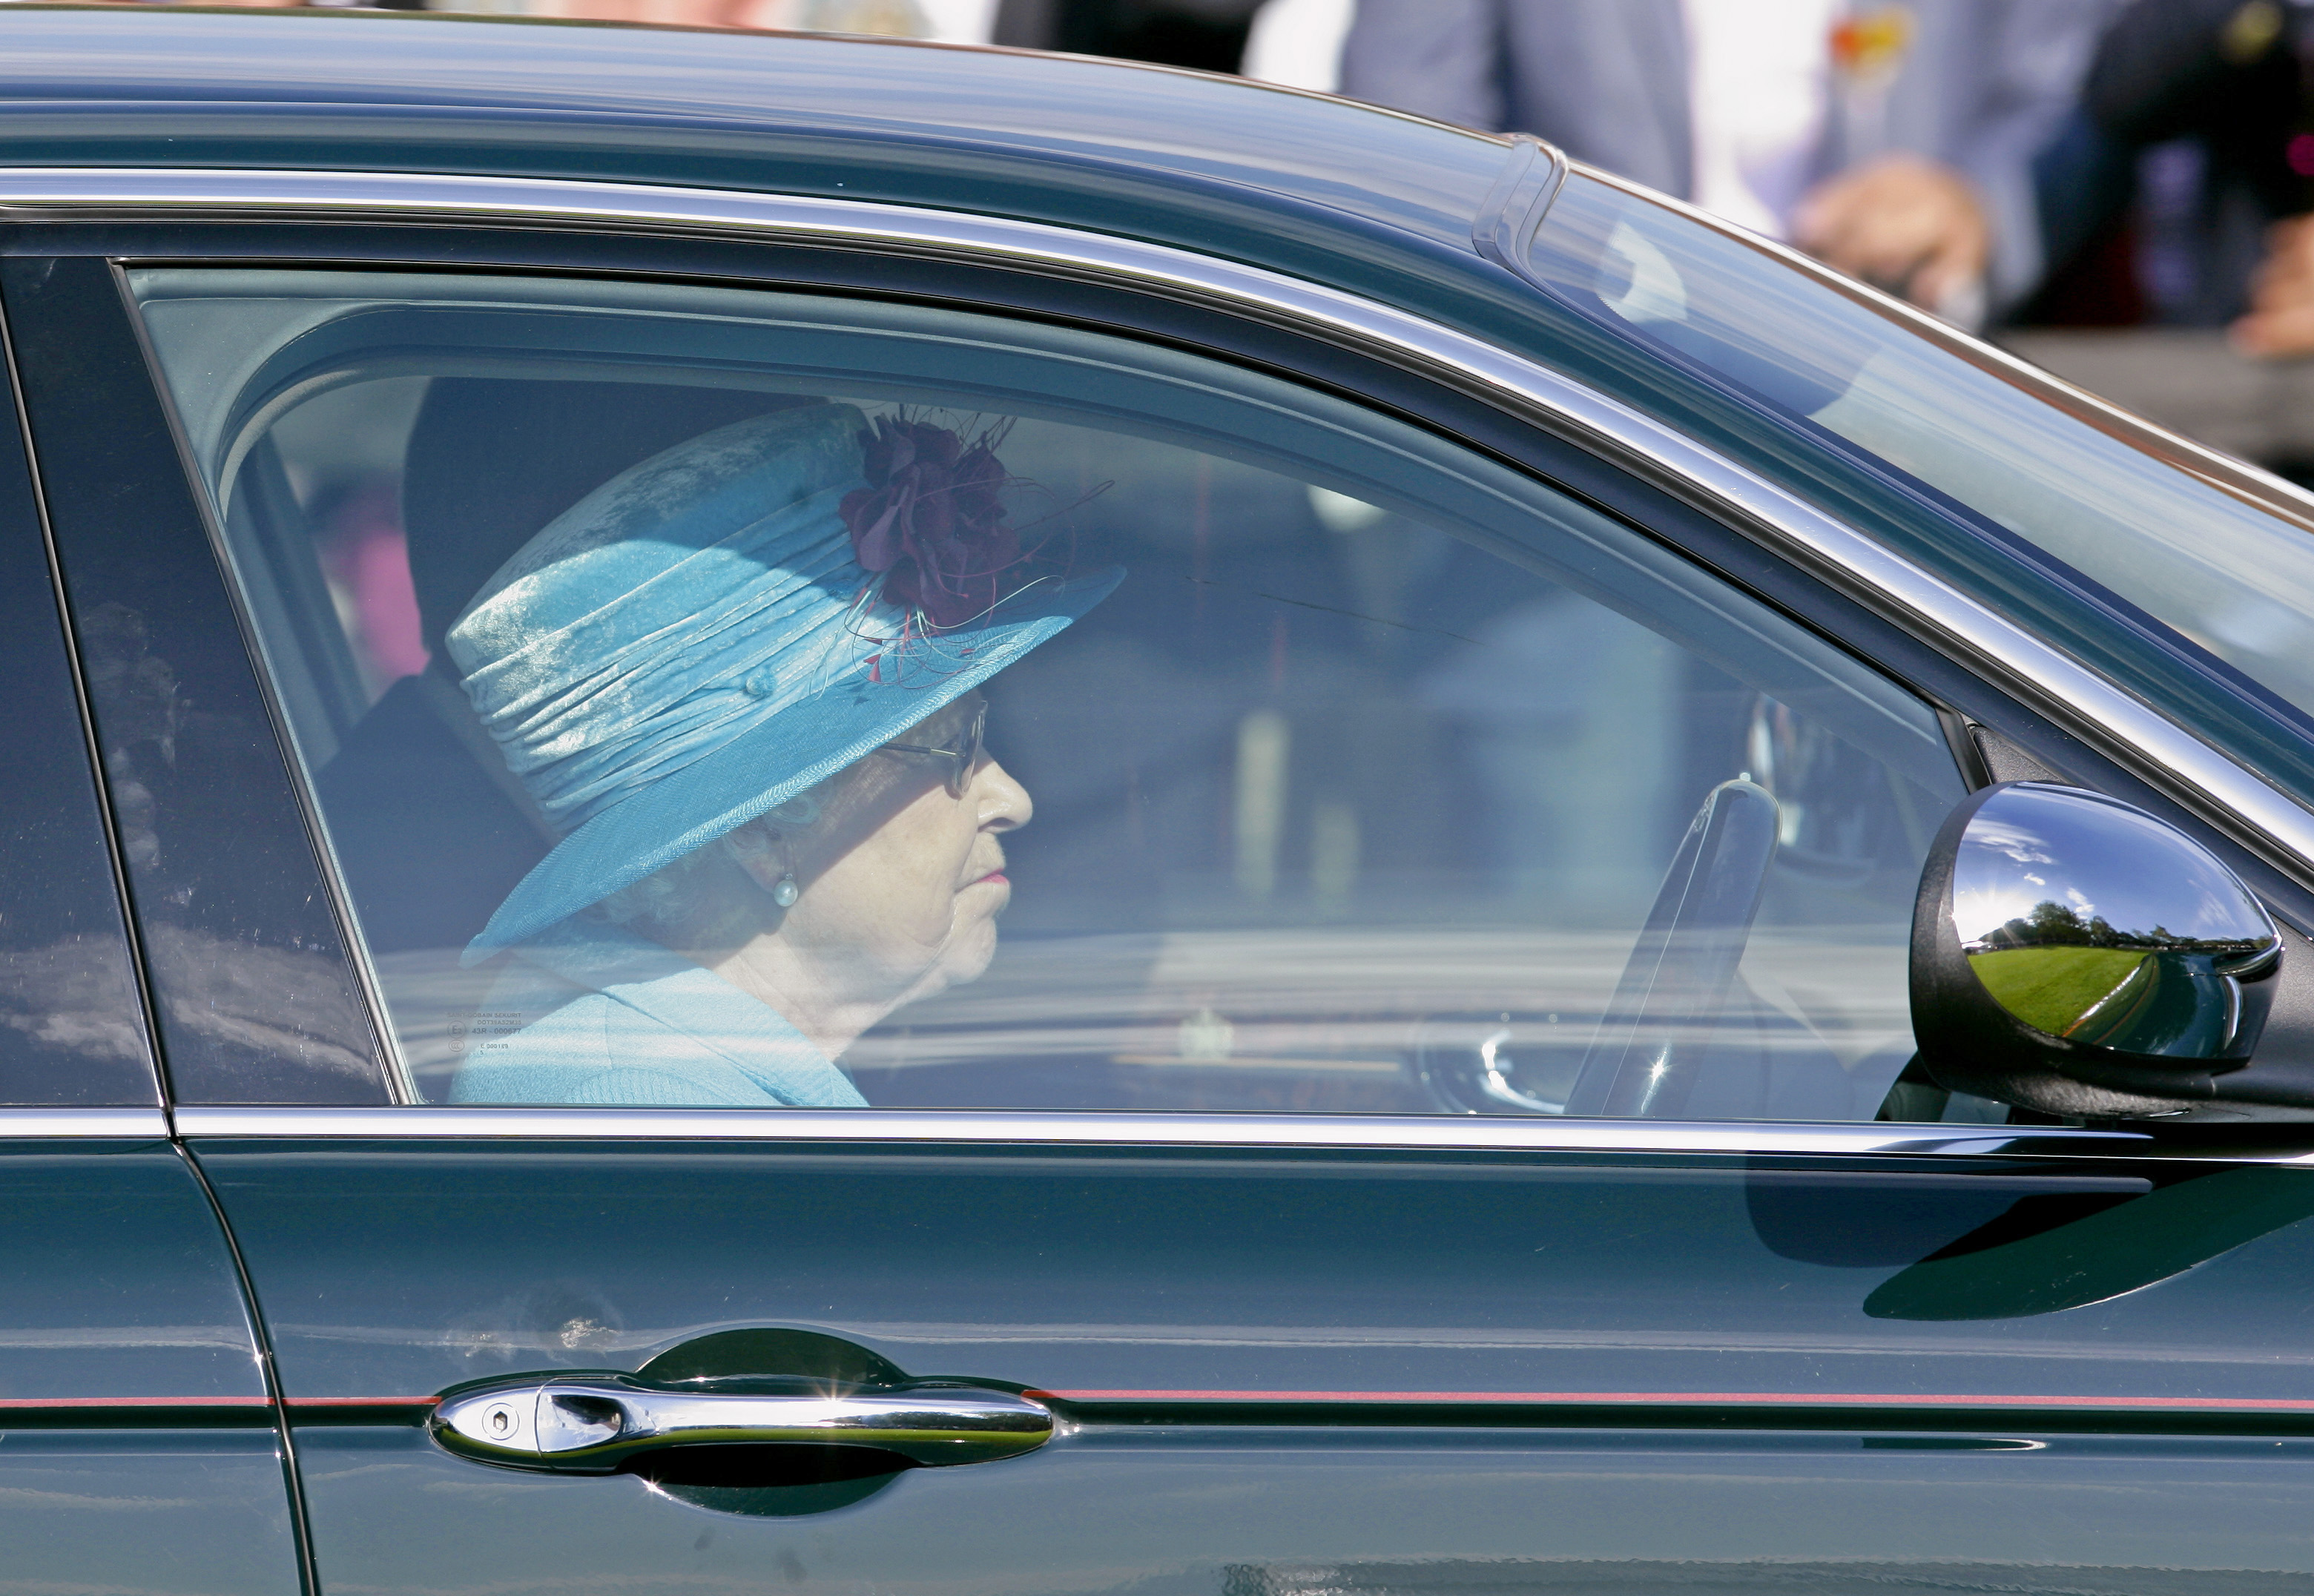 EGHAM, UNITED KINGDOM - JUNE 13: (EMBARGOED FOR PUBLICATION IN UK NEWSPAPERS UNTIL 48 HOURS AFTER CREATE DATE AND TIME) HM Queen Elizabeth II drives her Jaguar car as she leaves after watching the the final of the Harcourt Developments Queen's Cup polo tournament at Guards Polo Club on June 13, 2010 in Egham, England. (Photo by Indigo/Getty Images) (Max Mumby/Indigo—Getty Images)